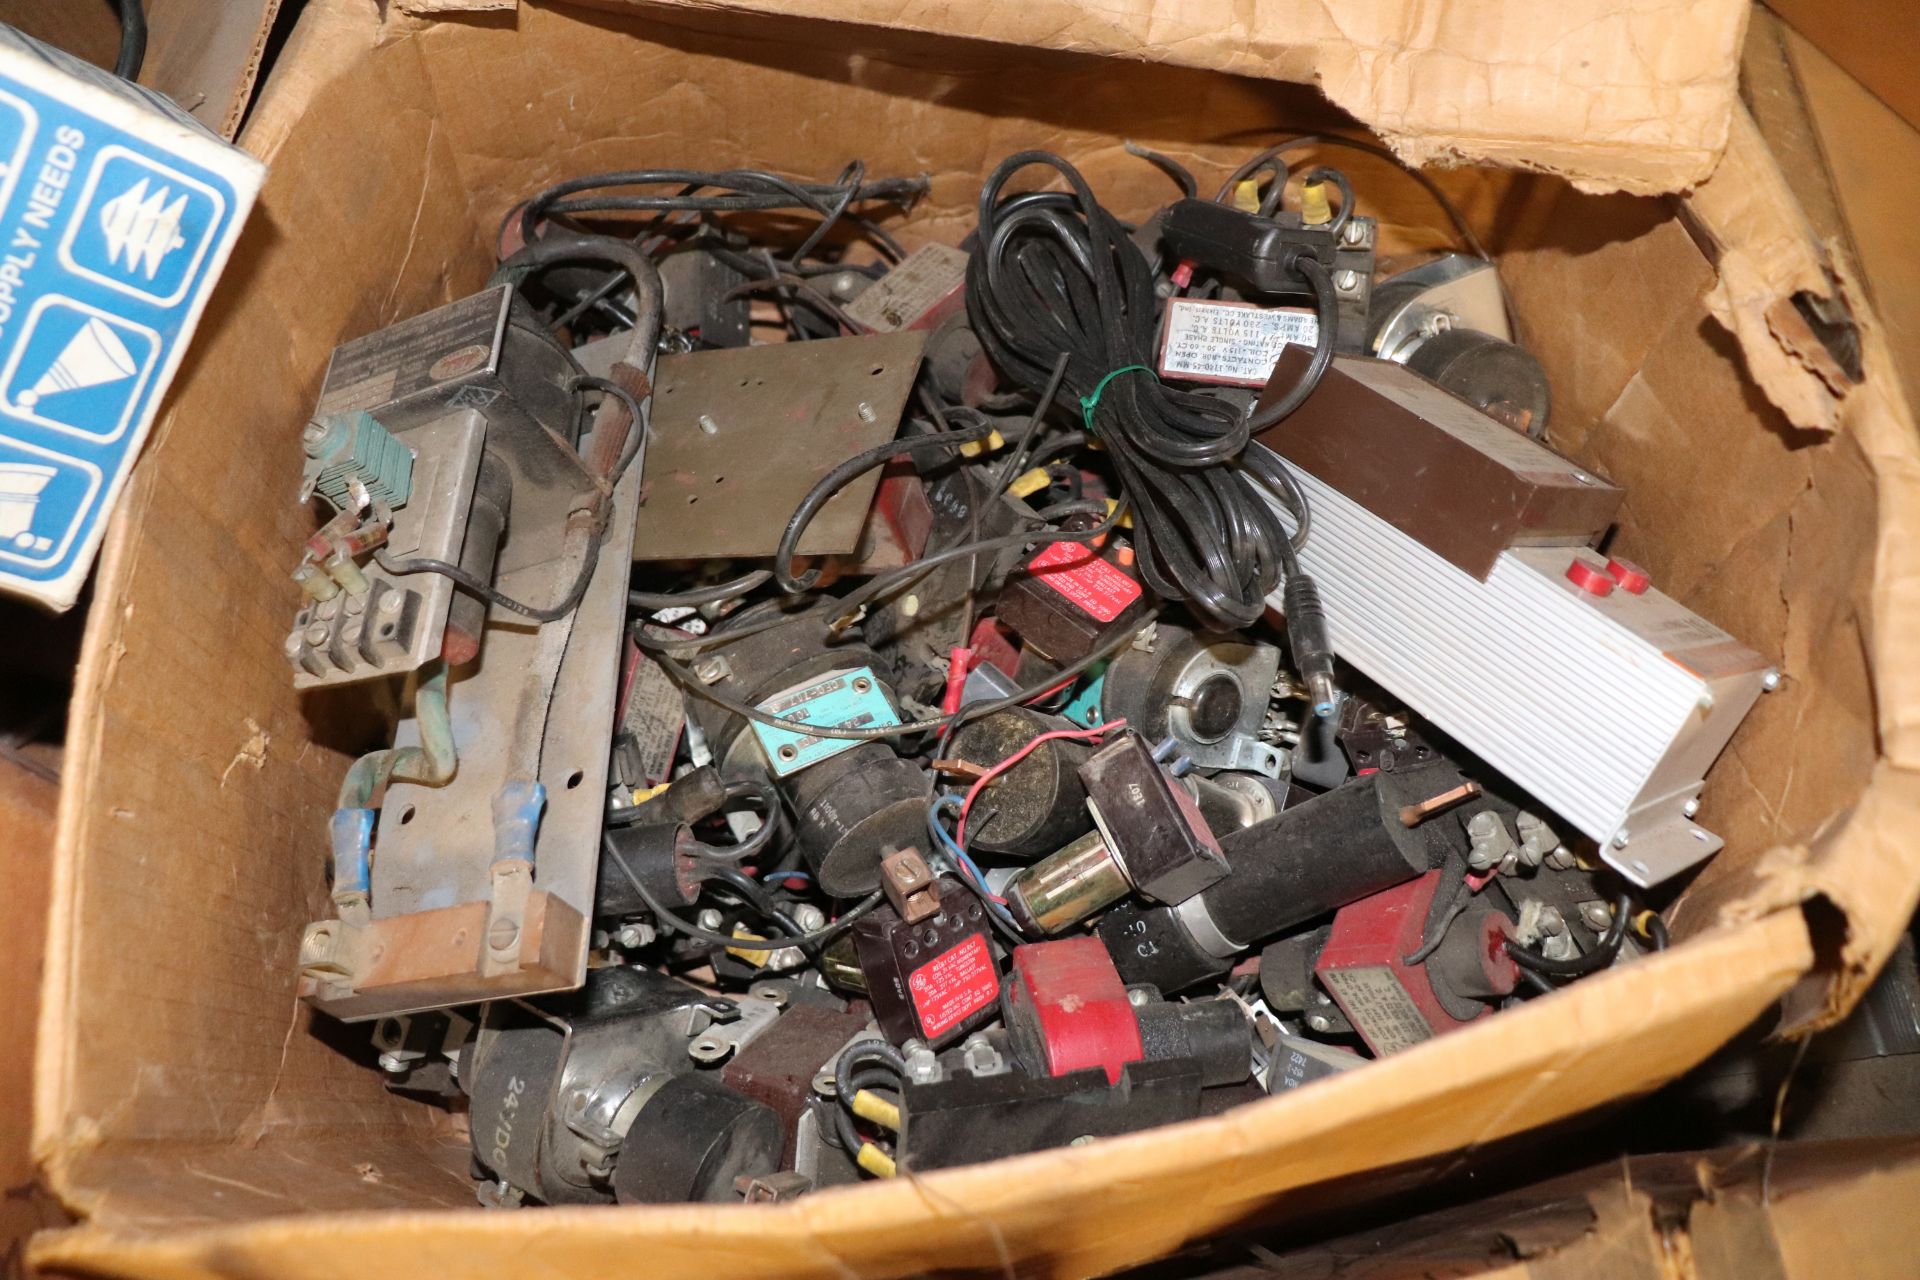 Pallet of small light bulbs, electrical components, circuit breakers, power bricks, and electric mot - Image 10 of 11